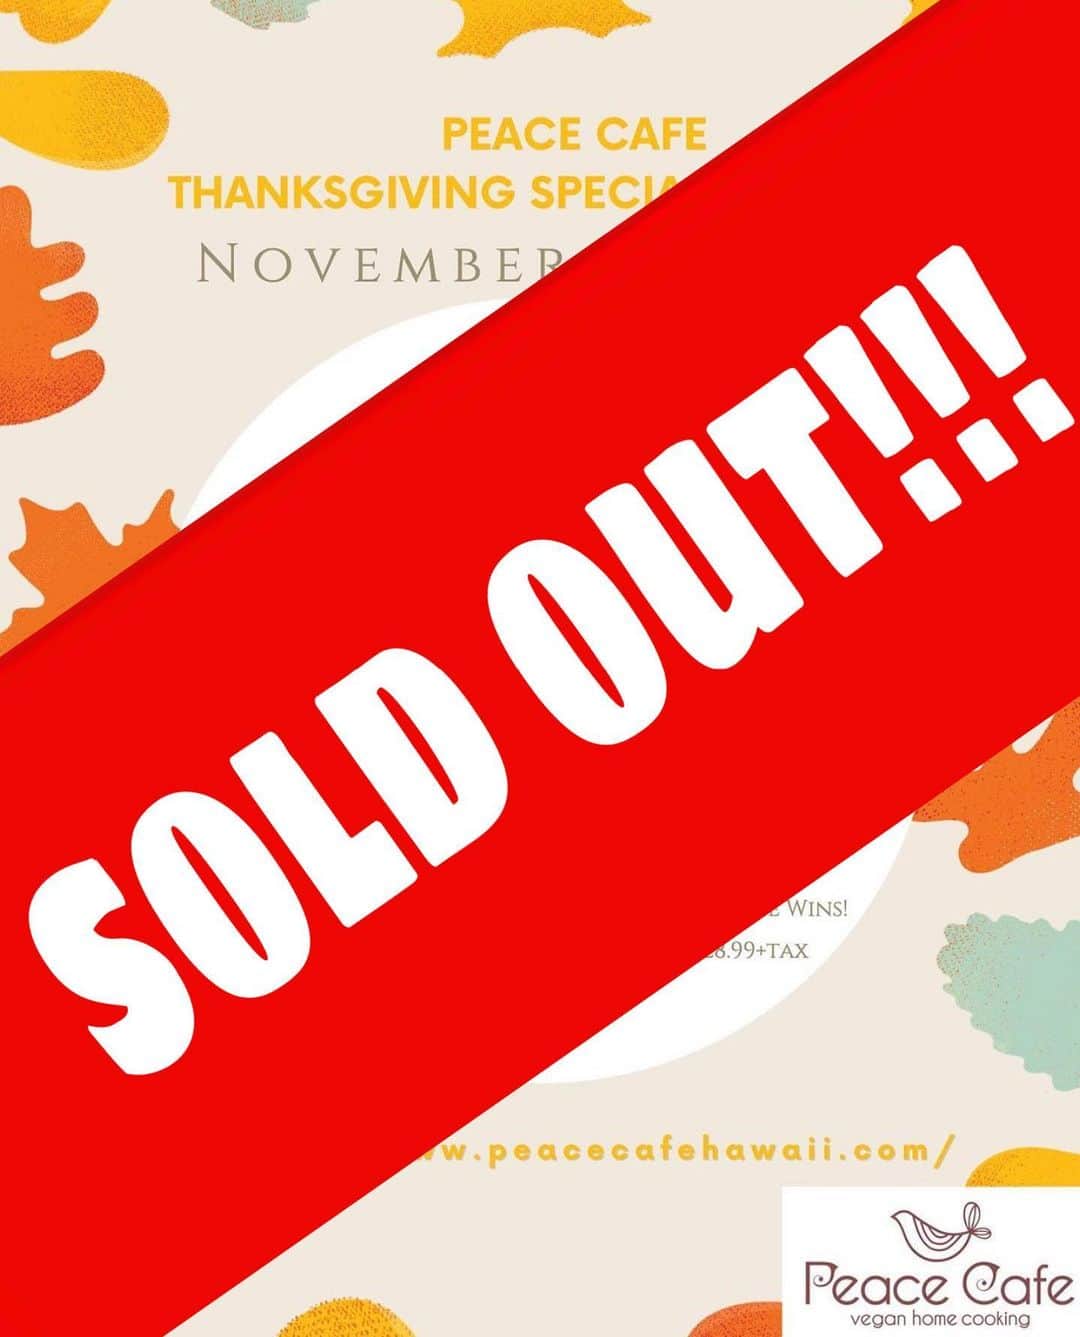 Peace Cafeのインスタグラム：「Happy Thanksgiving 🍁🍽✨ Thank you all so so much for your orders and constant support! We have completely SOLD OUT of our thanksgiving special platter. We will be open again tomorrow with our regular hours and menu! Mahalo again & have a beautiful thanksgiving! ❤️ Love, Peace Cafe ☮️ ✌️」